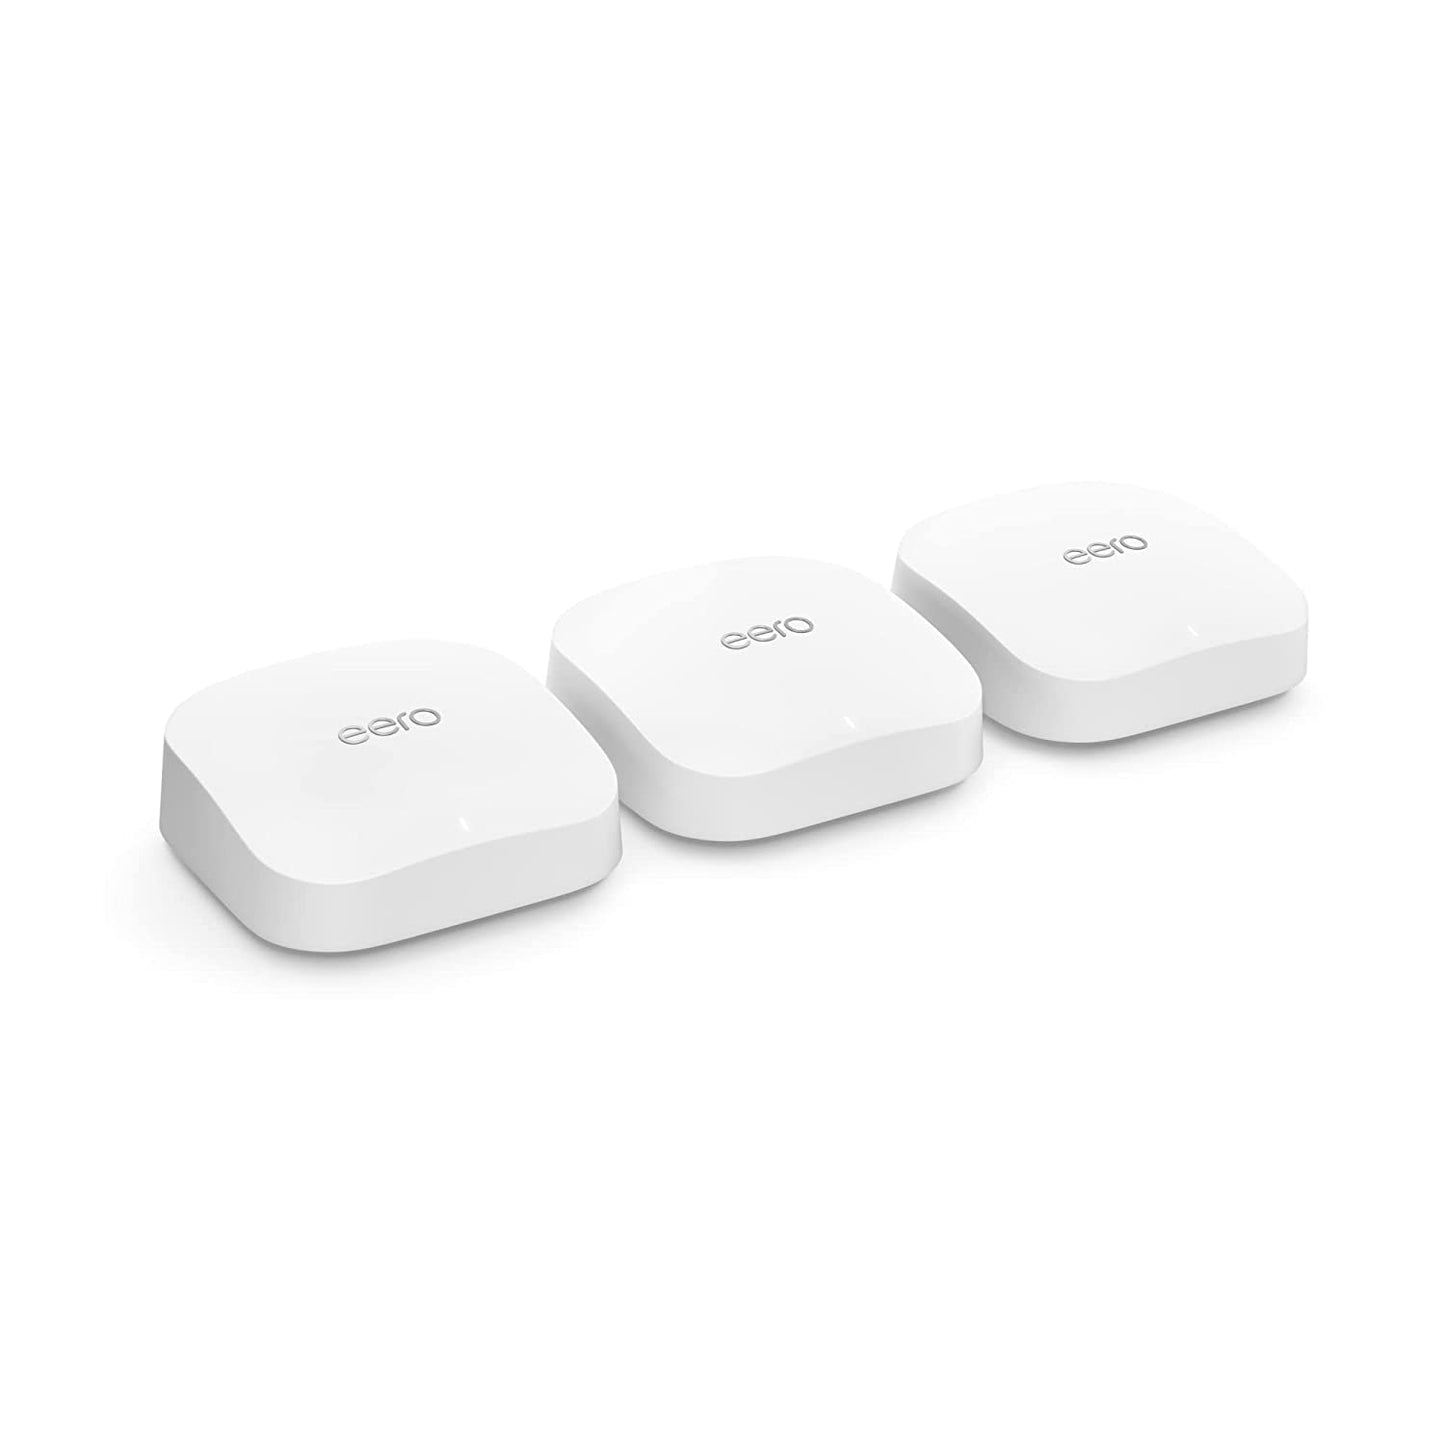 eero Pro 6E Wireless Mesh Router - covers up to 6000 sq/ft (3 pack)